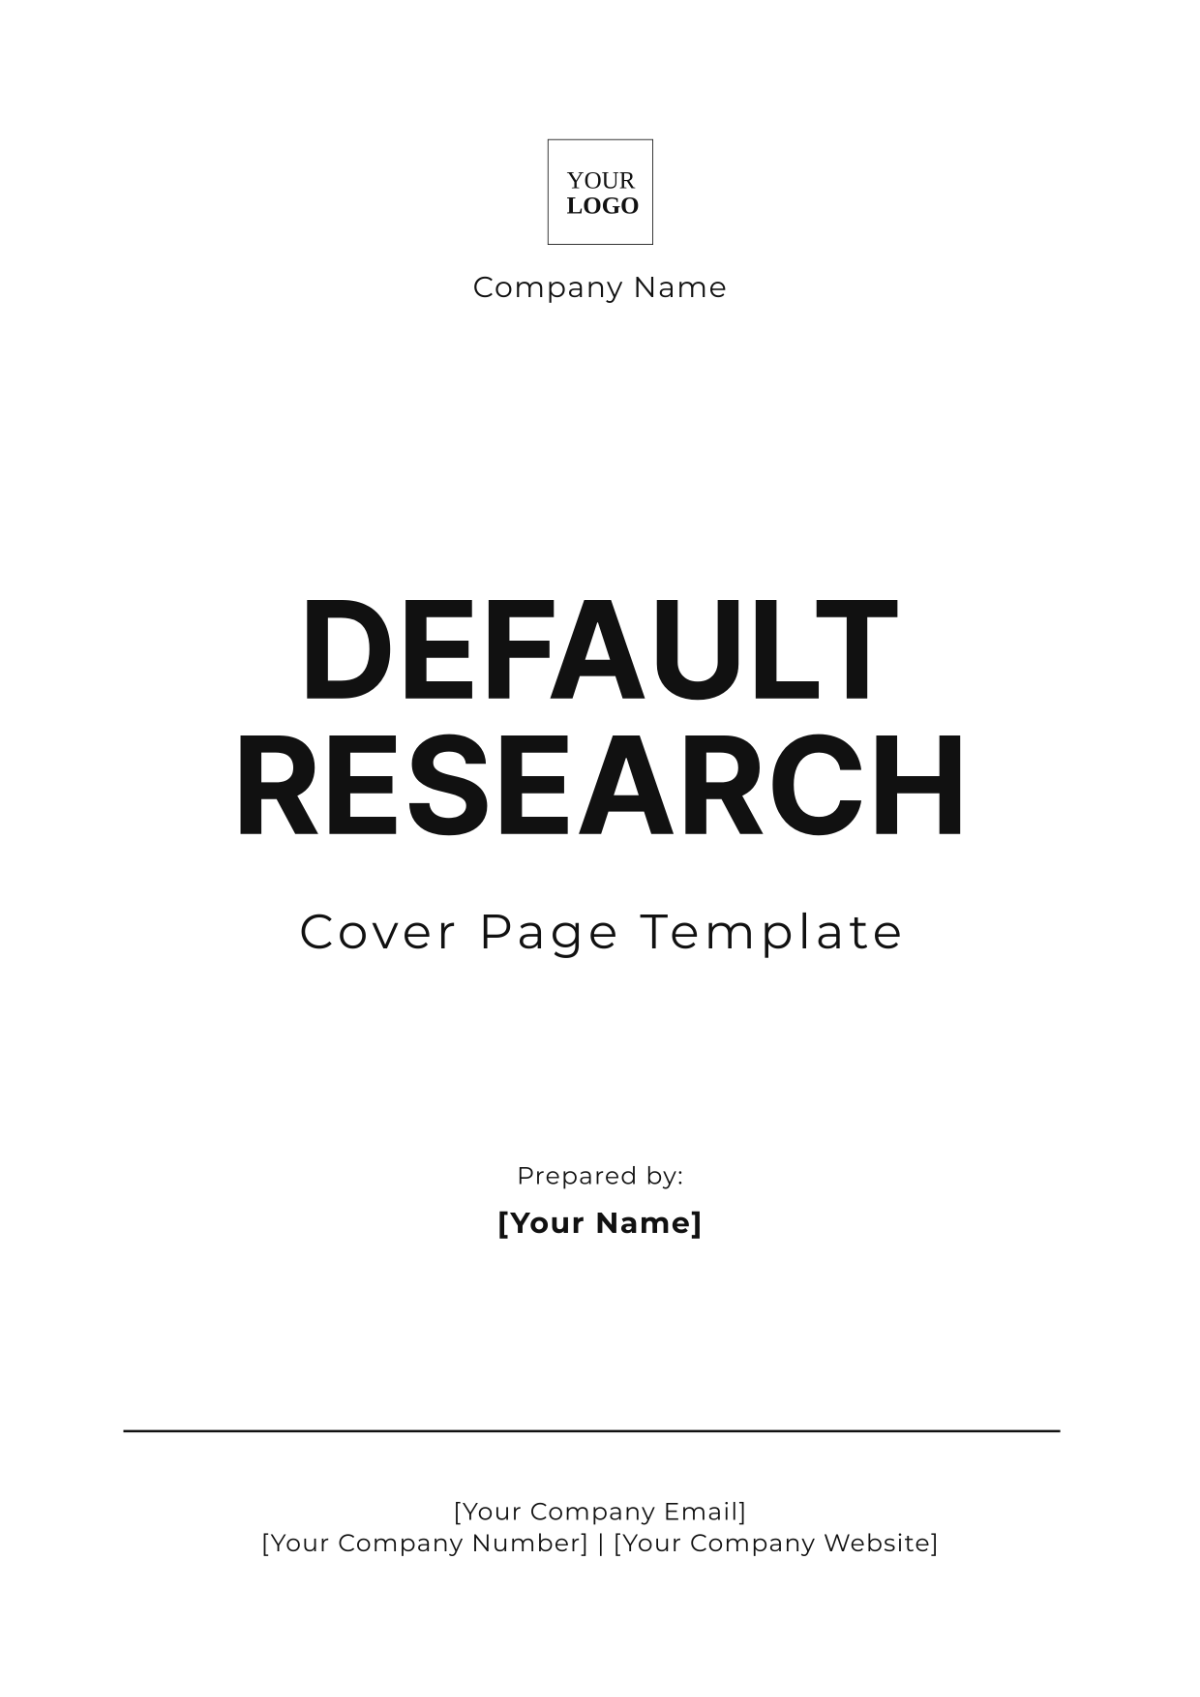 Default Research Cover Page